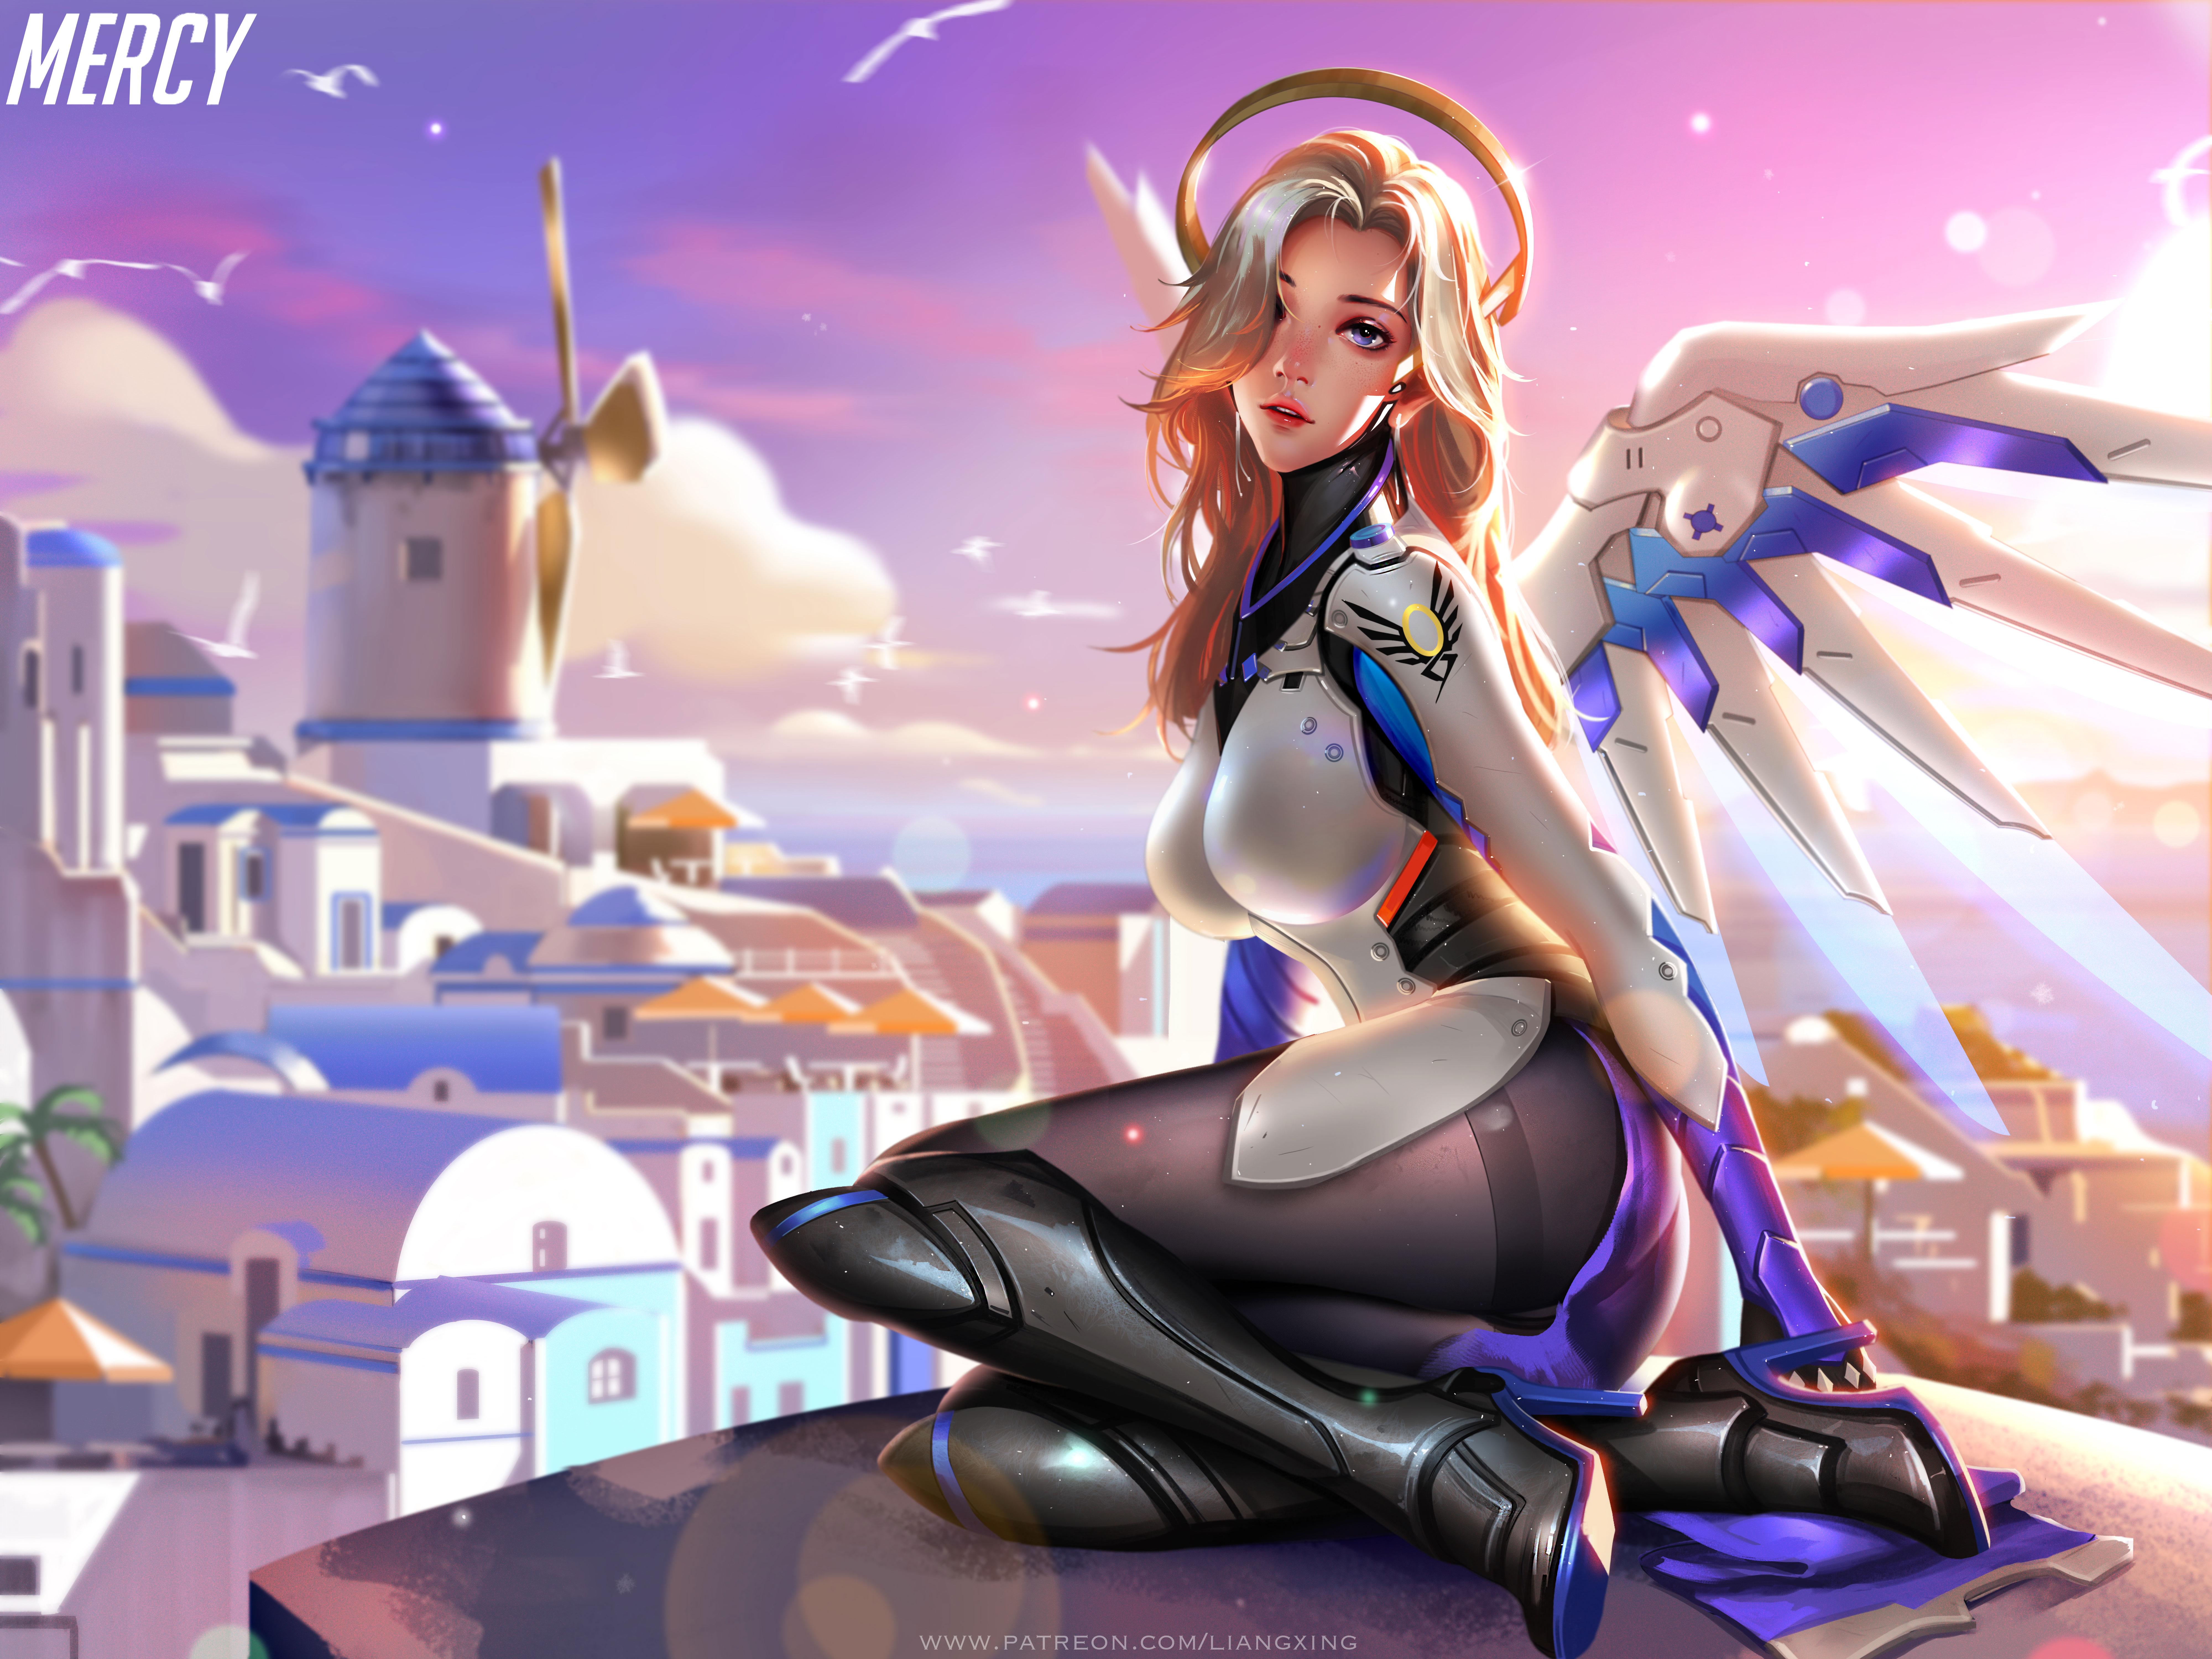 8000 x 6000 · jpeg - Mercy Overwatch 4k 8k, HD Games, 4k Wallpapers, Images, Backgrounds ...